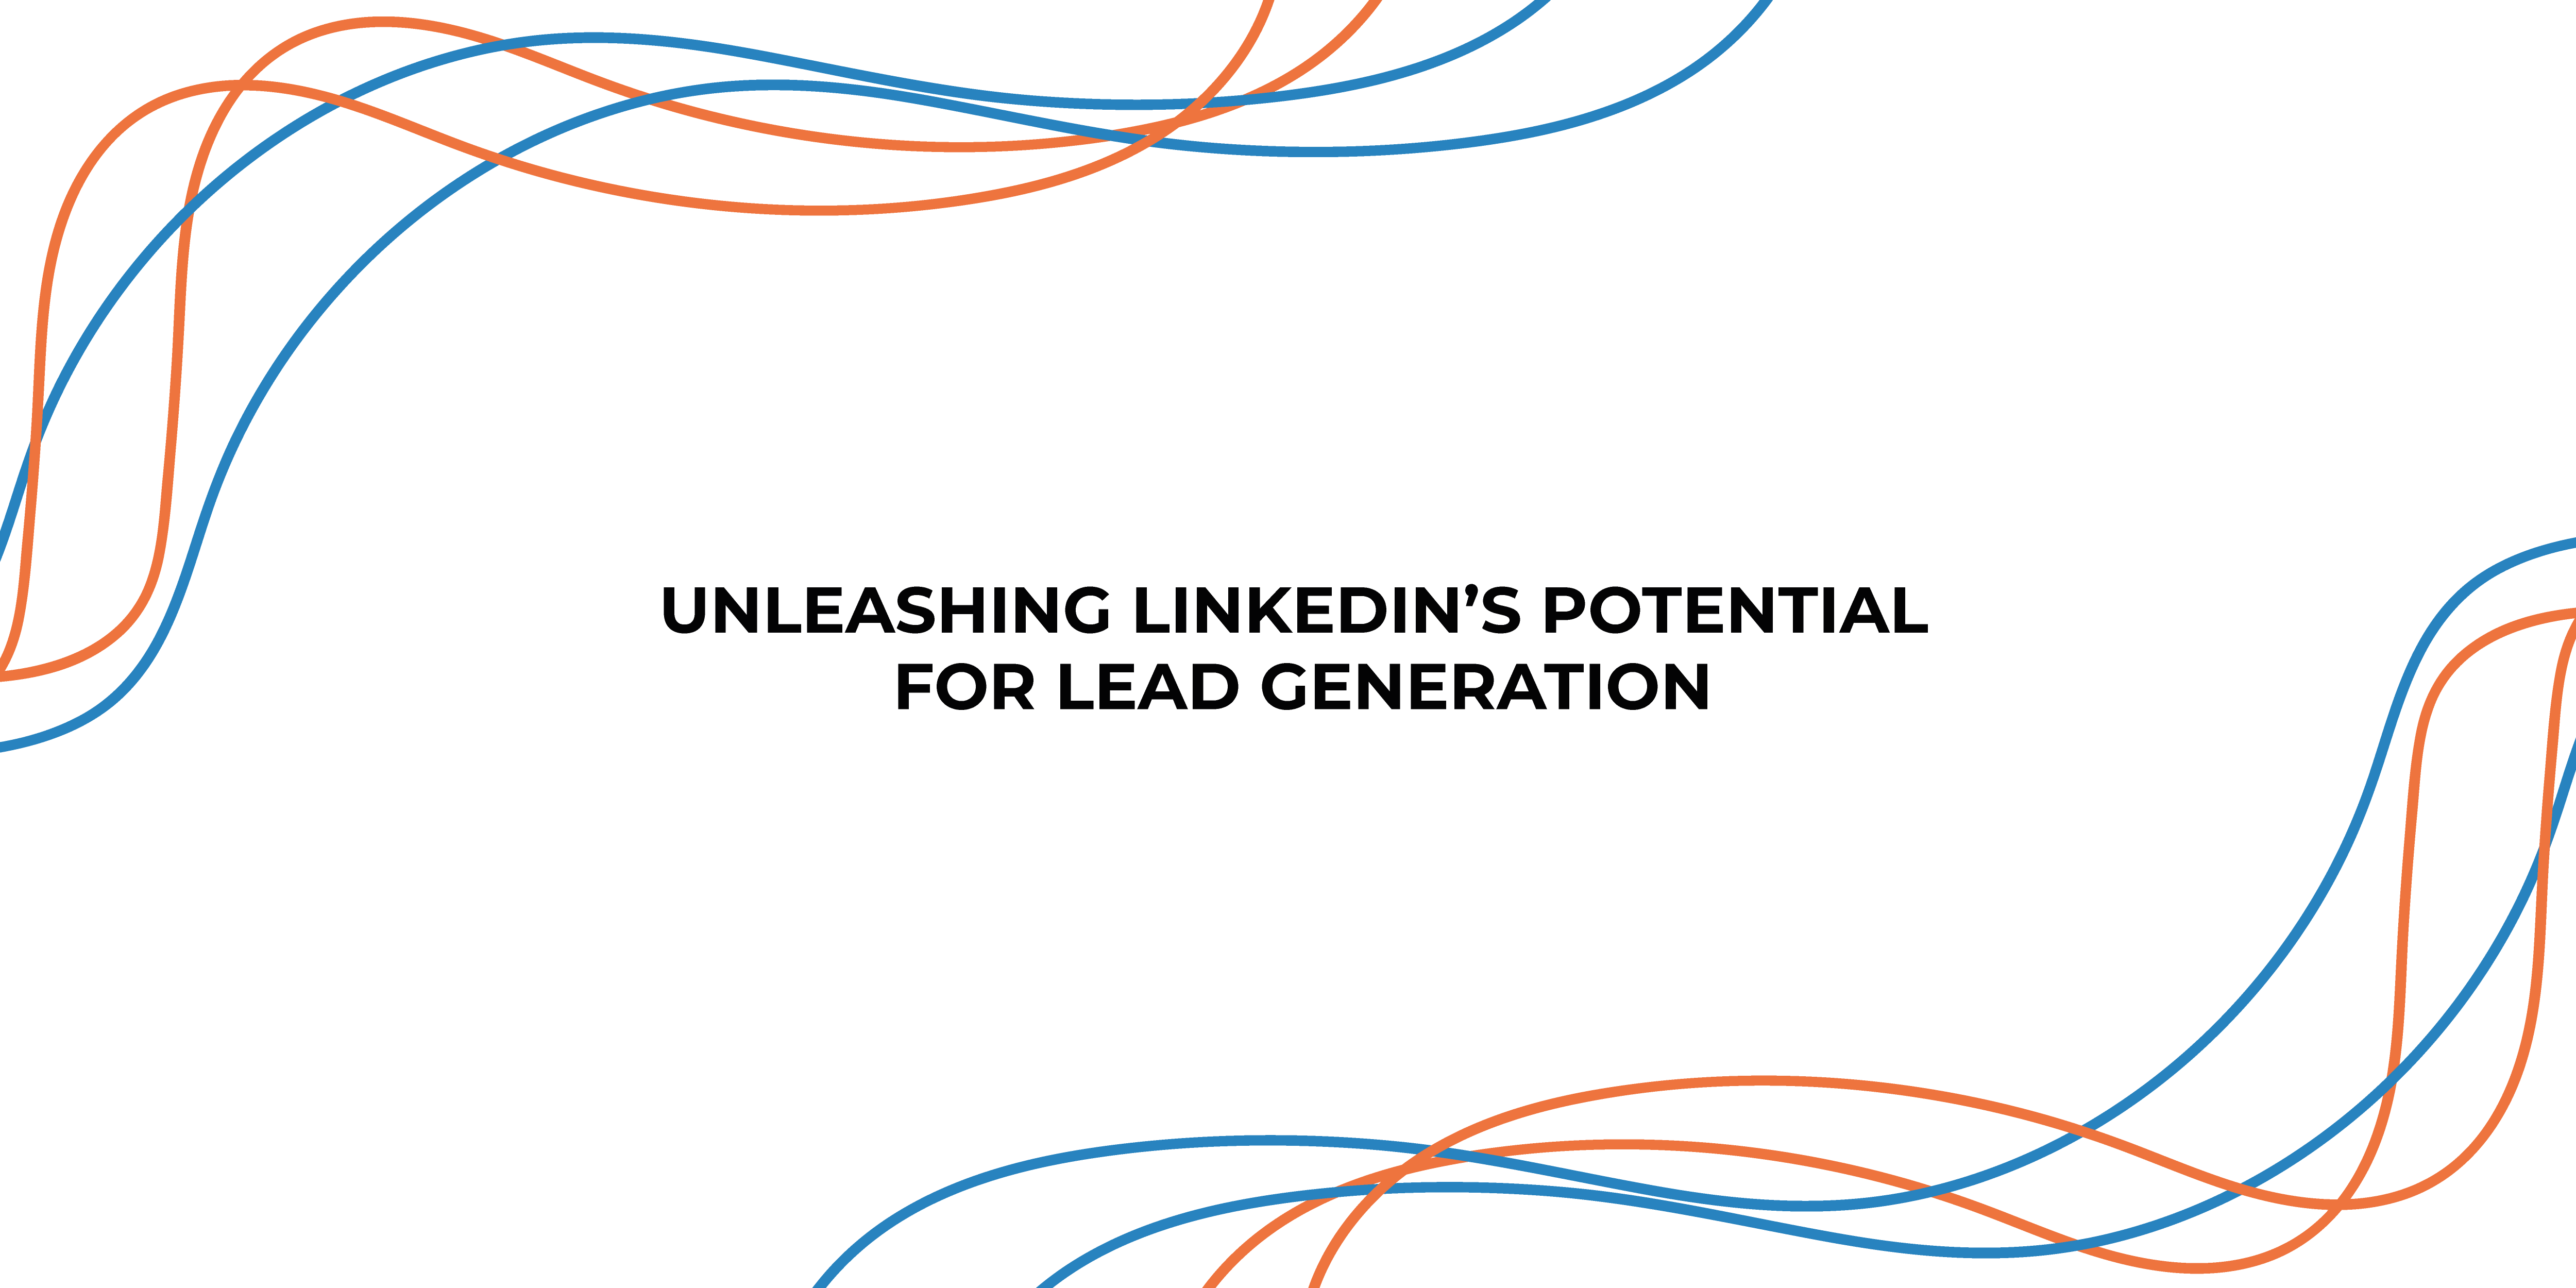 Unleashing LinkedIn’s Potential for Lead Generation